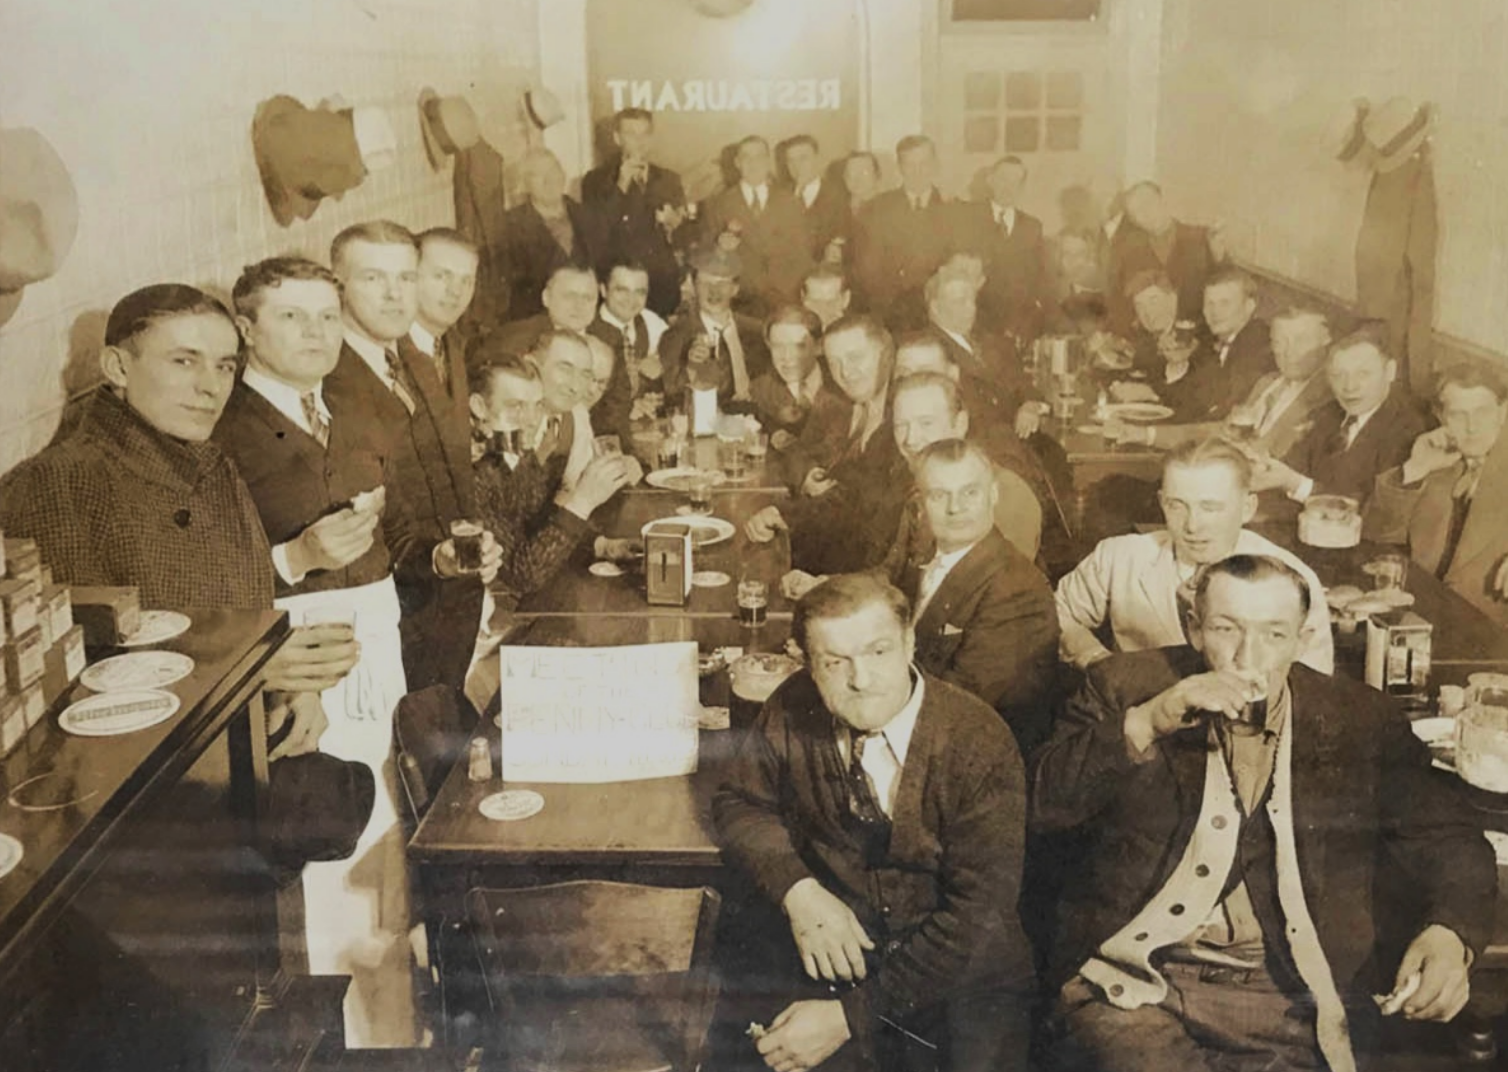 People gathered drinking beer in early 1900's